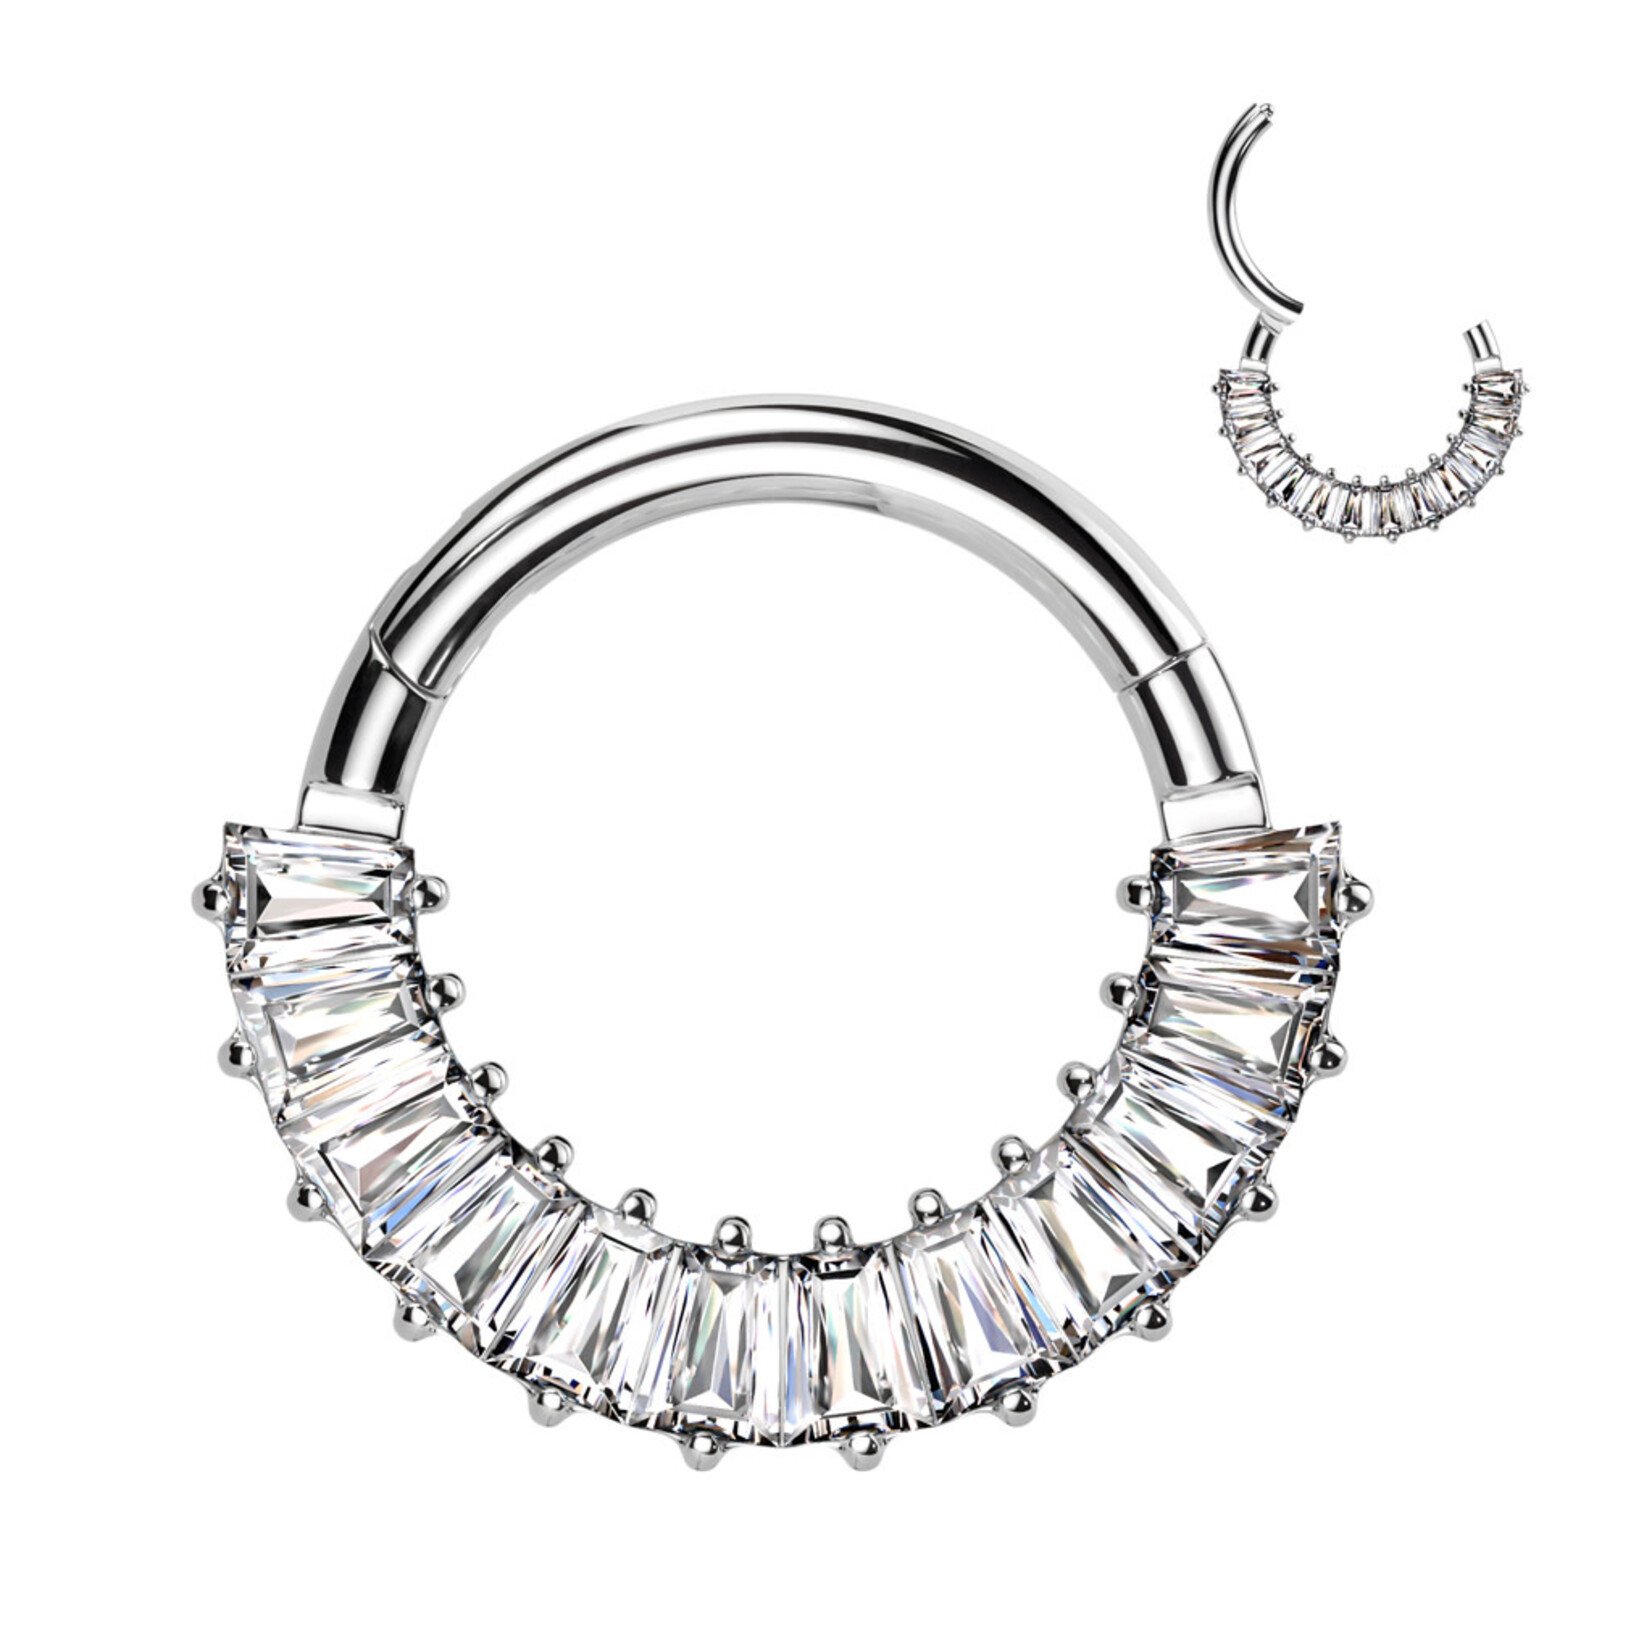 Hollywood Body Jewelry Titanium Hinged Hoop with front facing gems